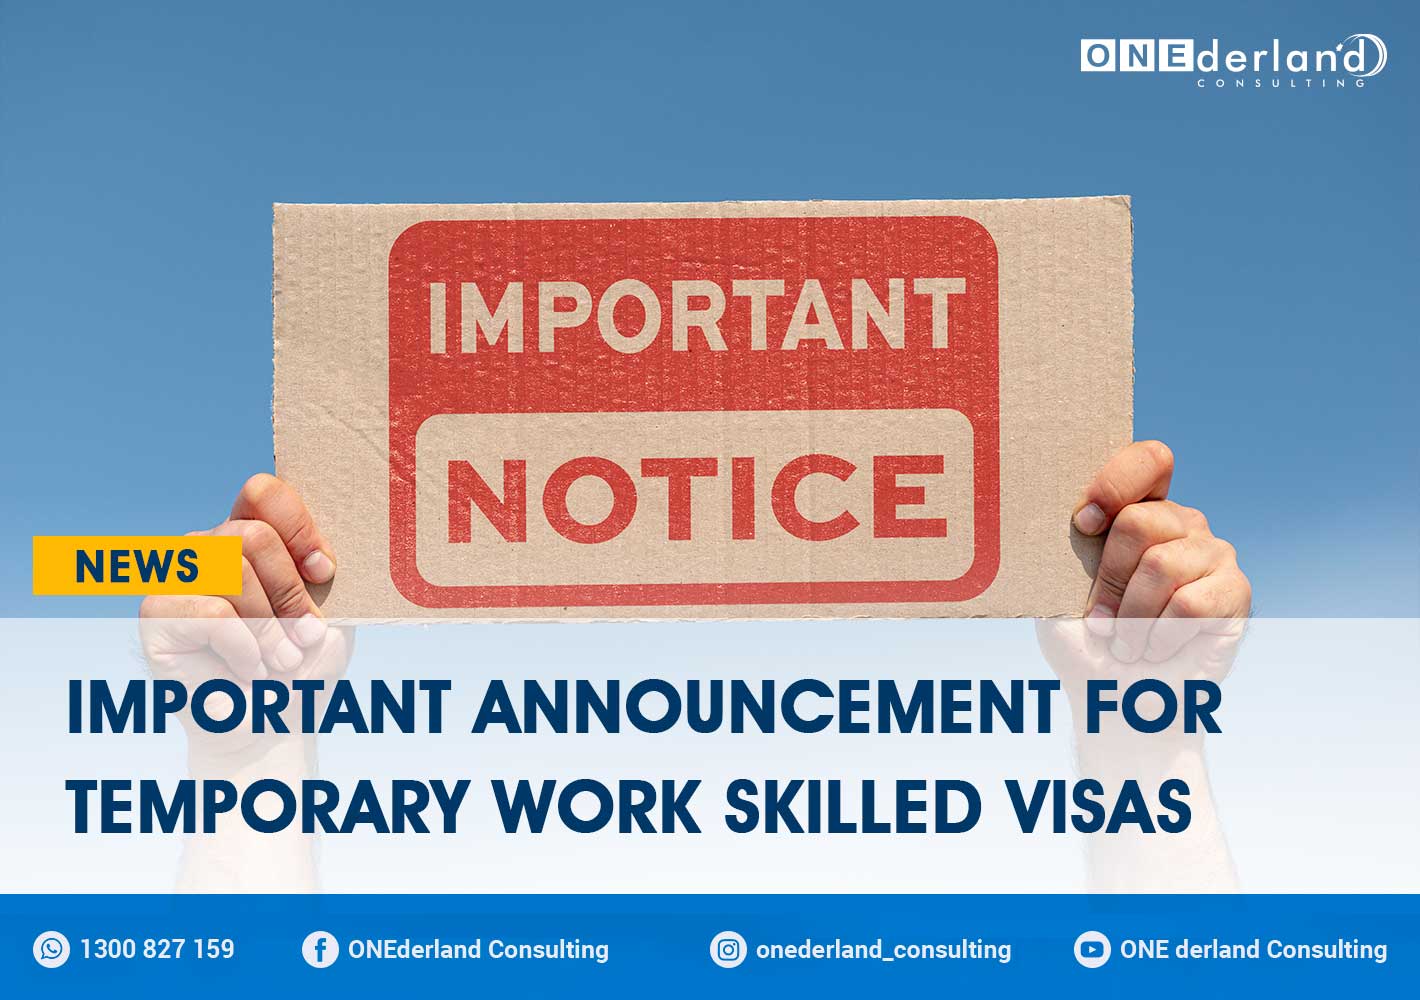 Announcement For Temporary Work Skilled Visa Has Been Made Today